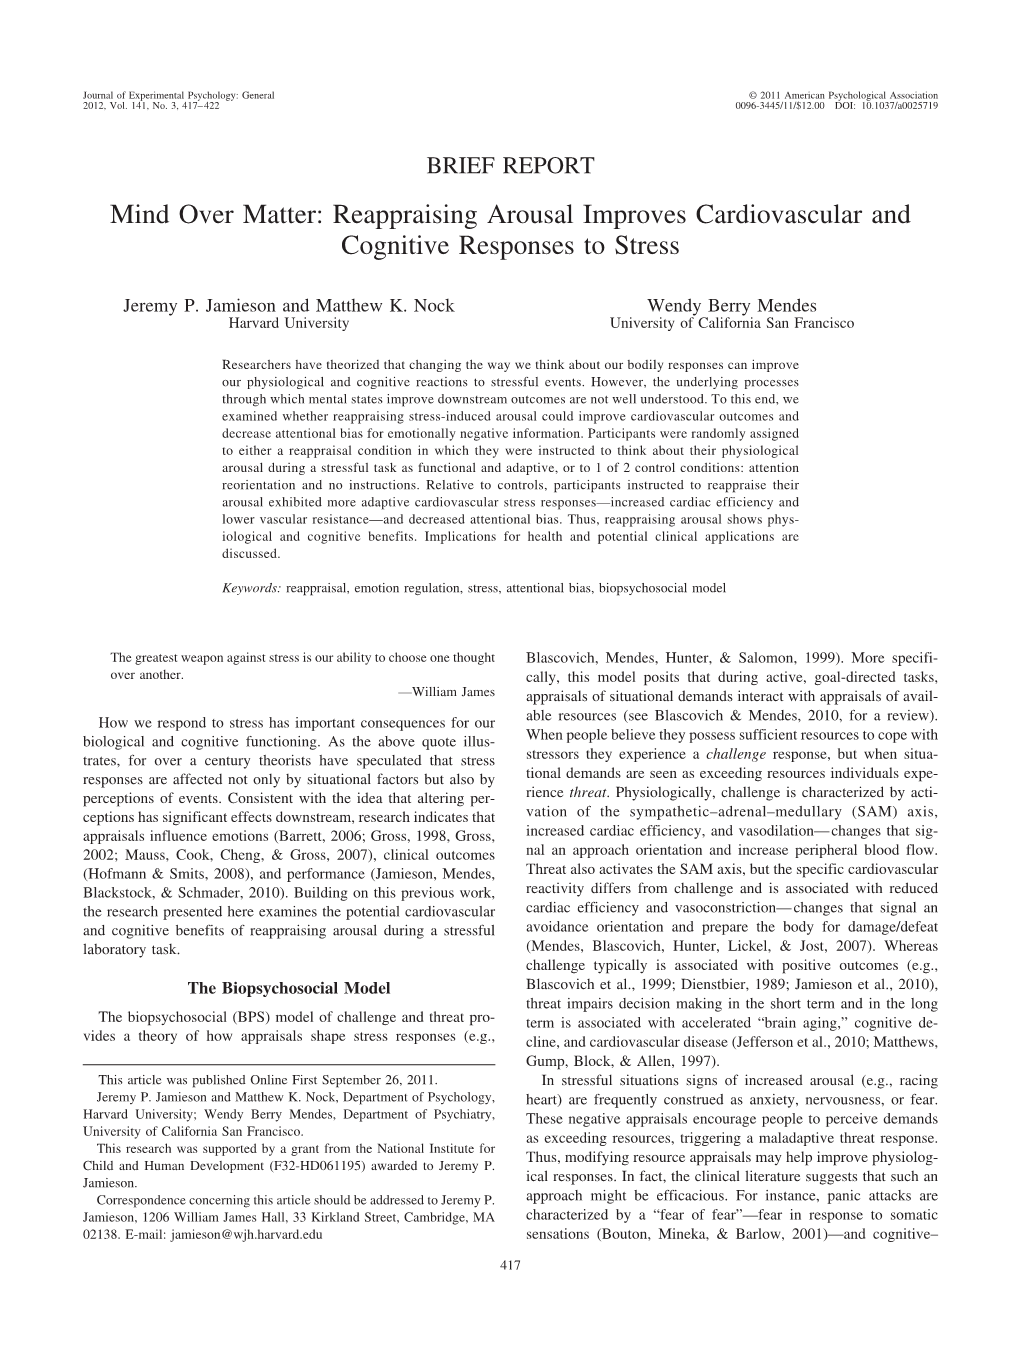 Mind Over Matter: Reappraising Arousal Improves Cardiovascular and Cognitive Responses to Stress